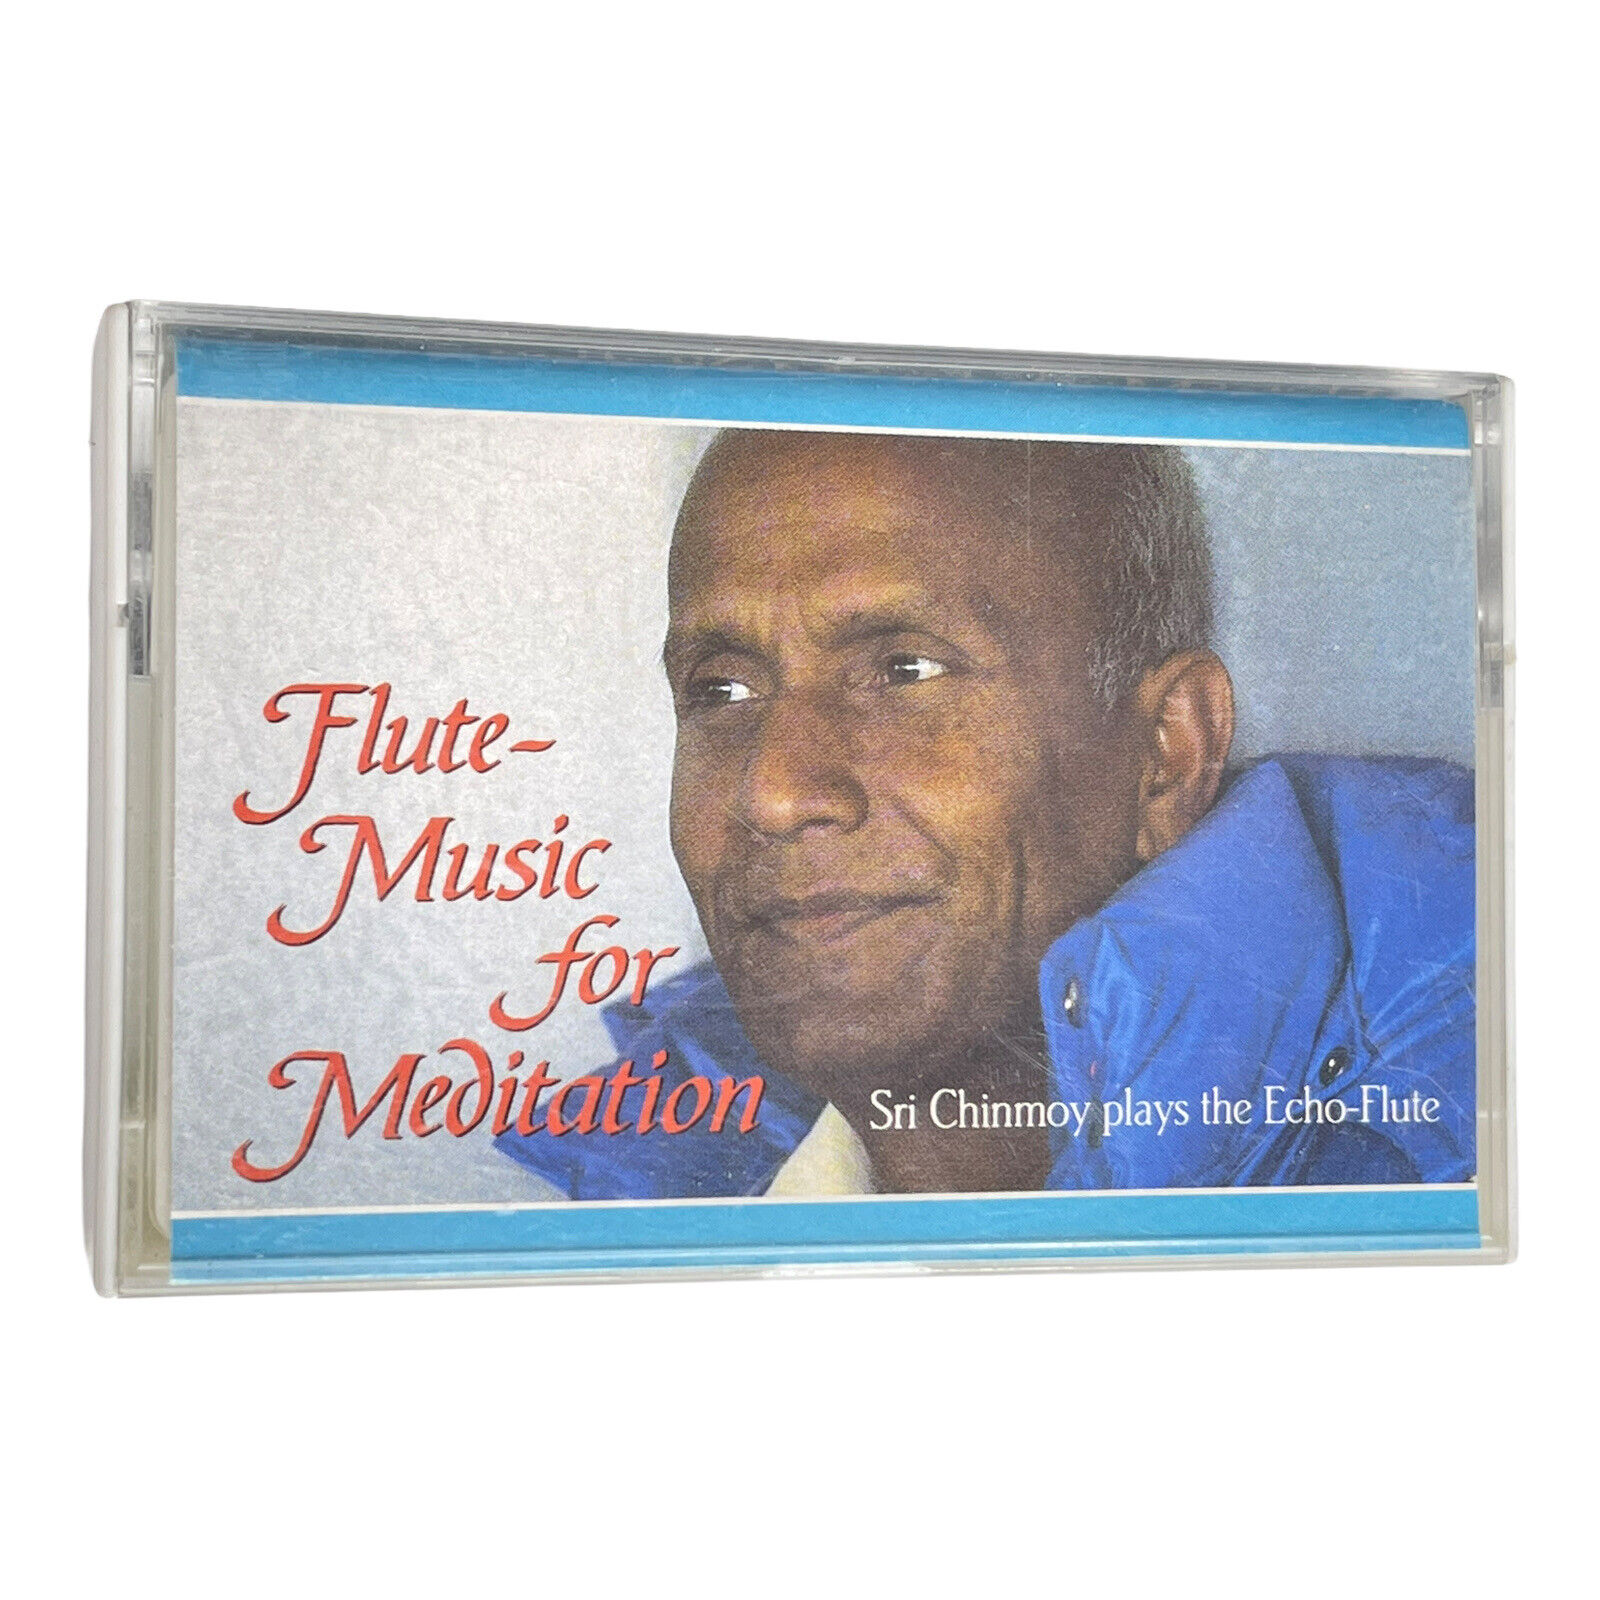 Flute- Music For Meditation Sri Chinmoy plays the Echo-Flute Yoga New Age Casset